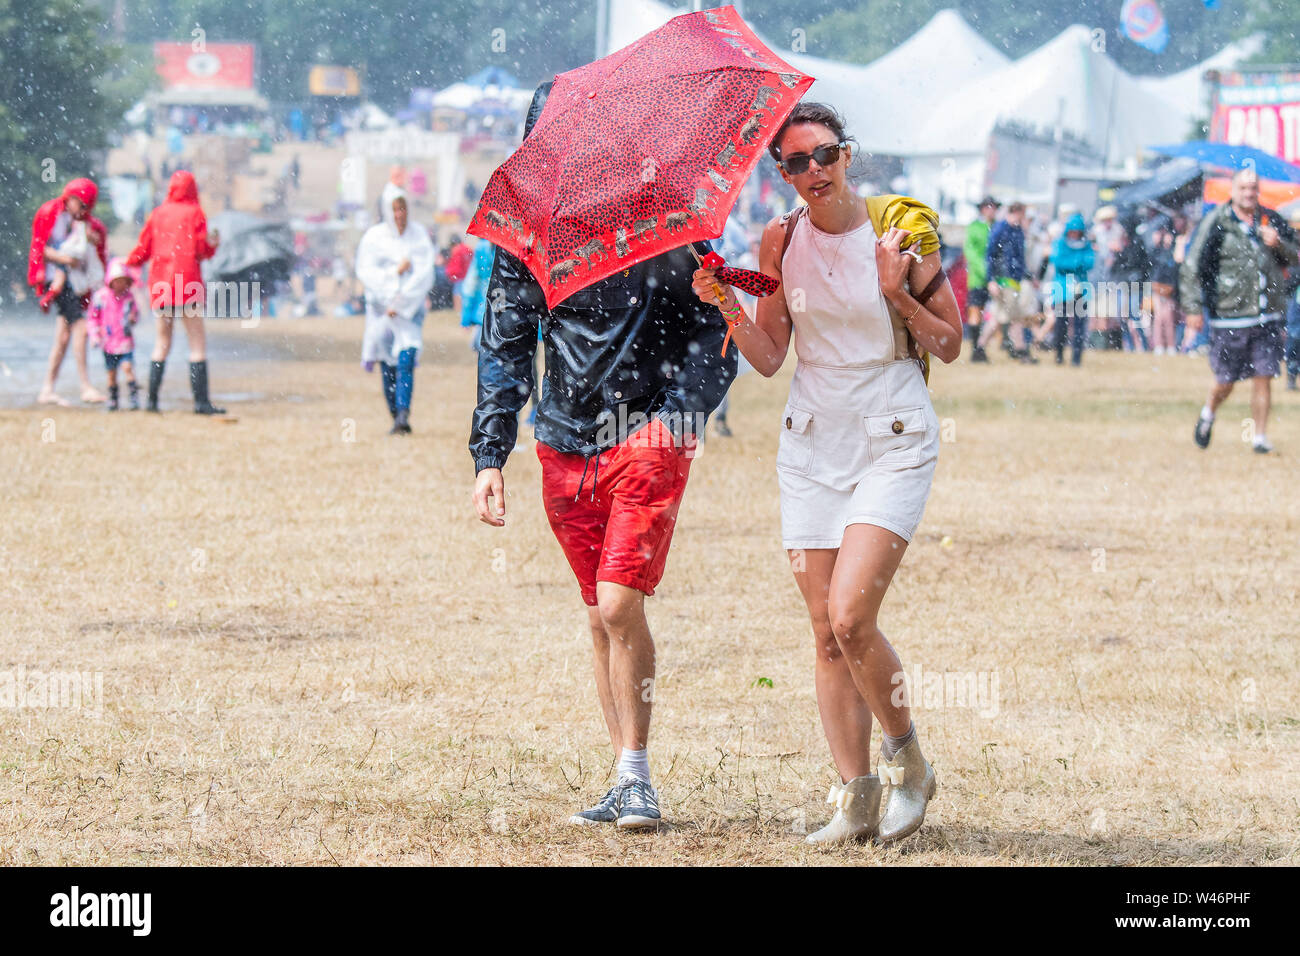 Henham Park, Suffolk, UK, , 20 July 2019. The rain falls and people dash for cover - The 2019 Latitude Festival. Credit: Guy Bell/Alamy Live News Credit: Guy Bell/Alamy Live News Credit: Guy Bell/Alamy Live News Credit: Guy Bell/Alamy Live News Stock Photo